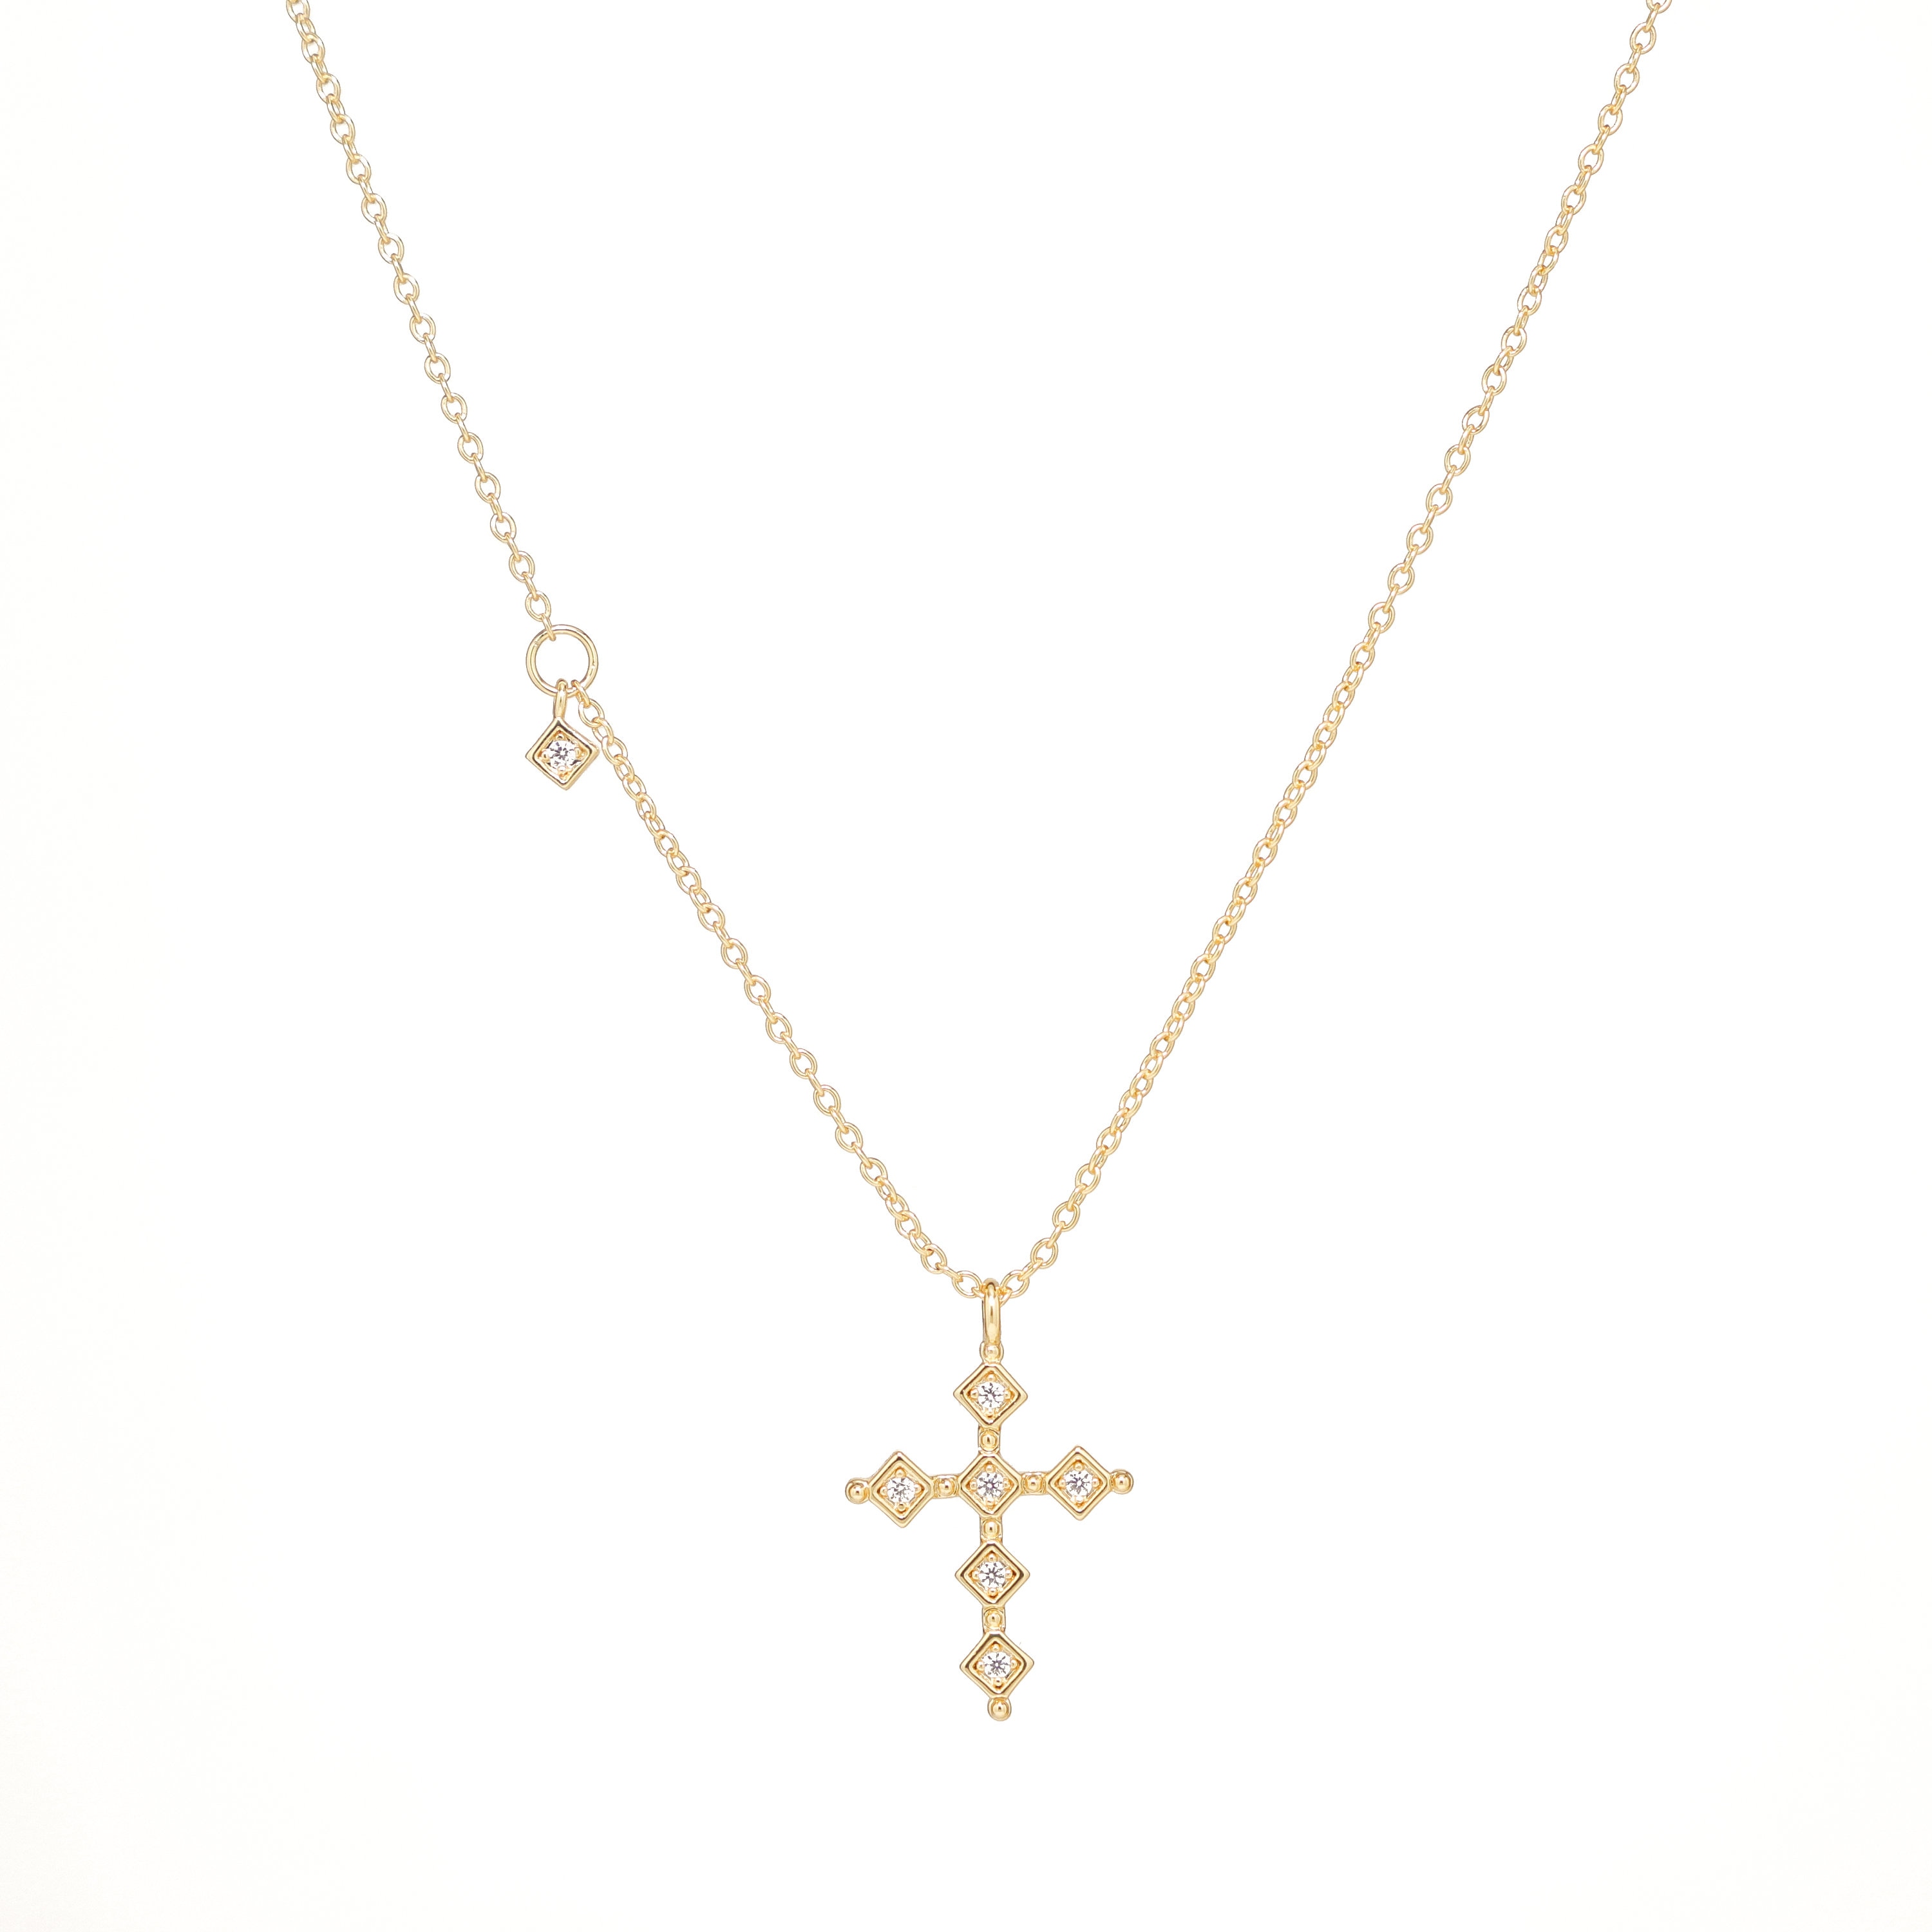 Cross Necklace Dainty Necklace Layered Necklaces for Women - Etsy